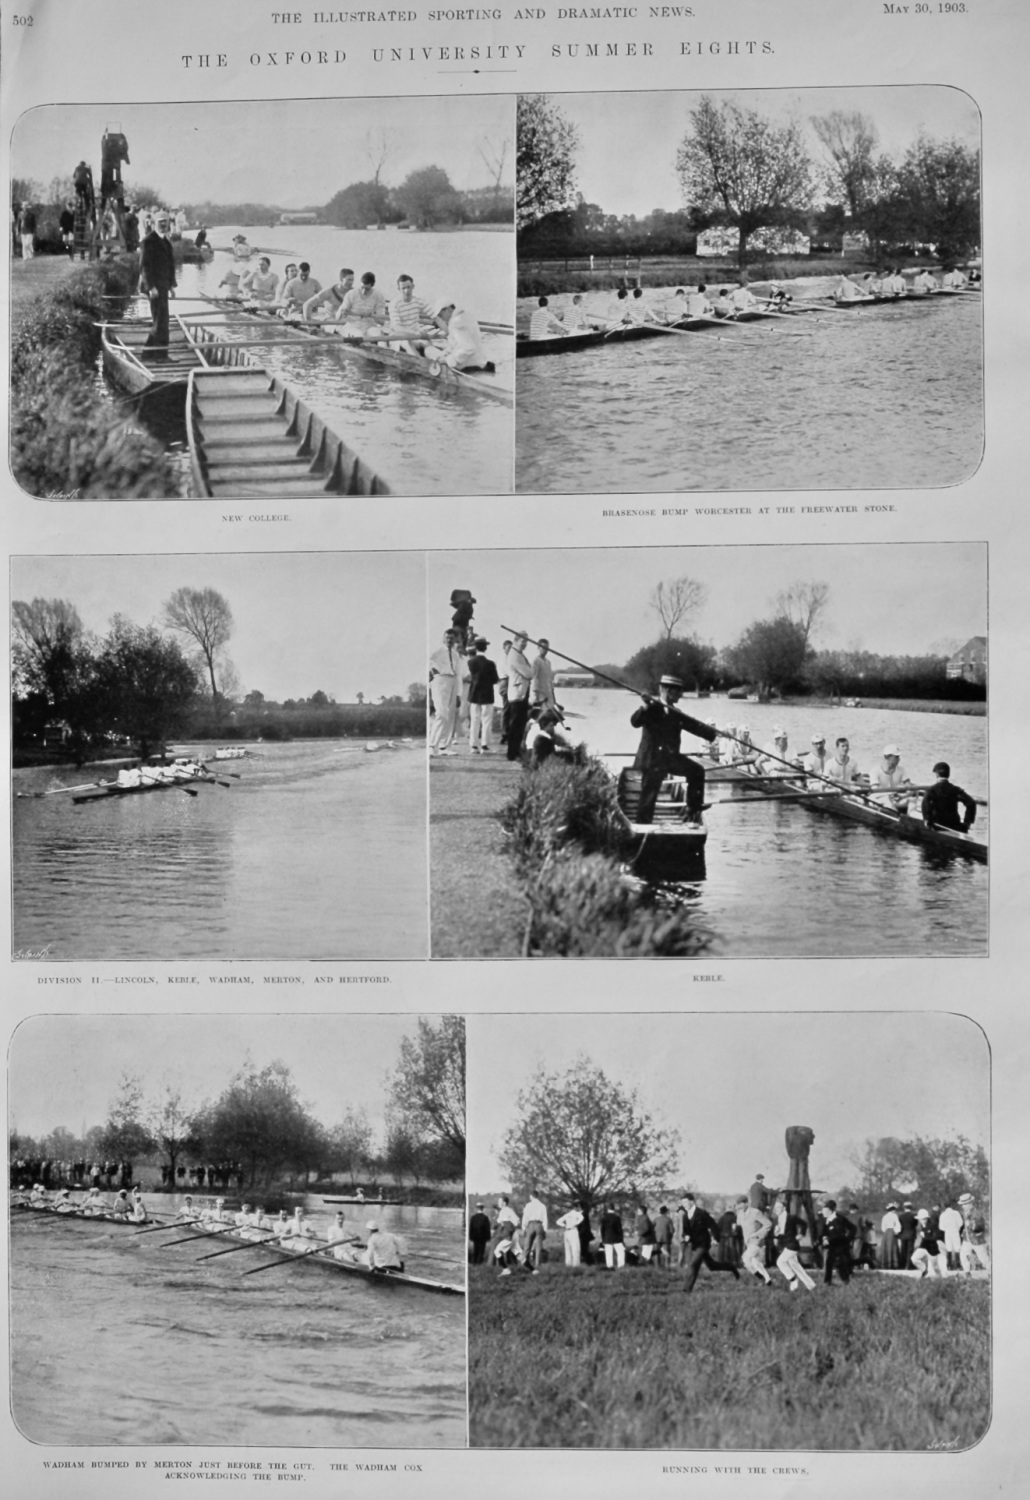 The Oxford University Summer Eights.  1903.